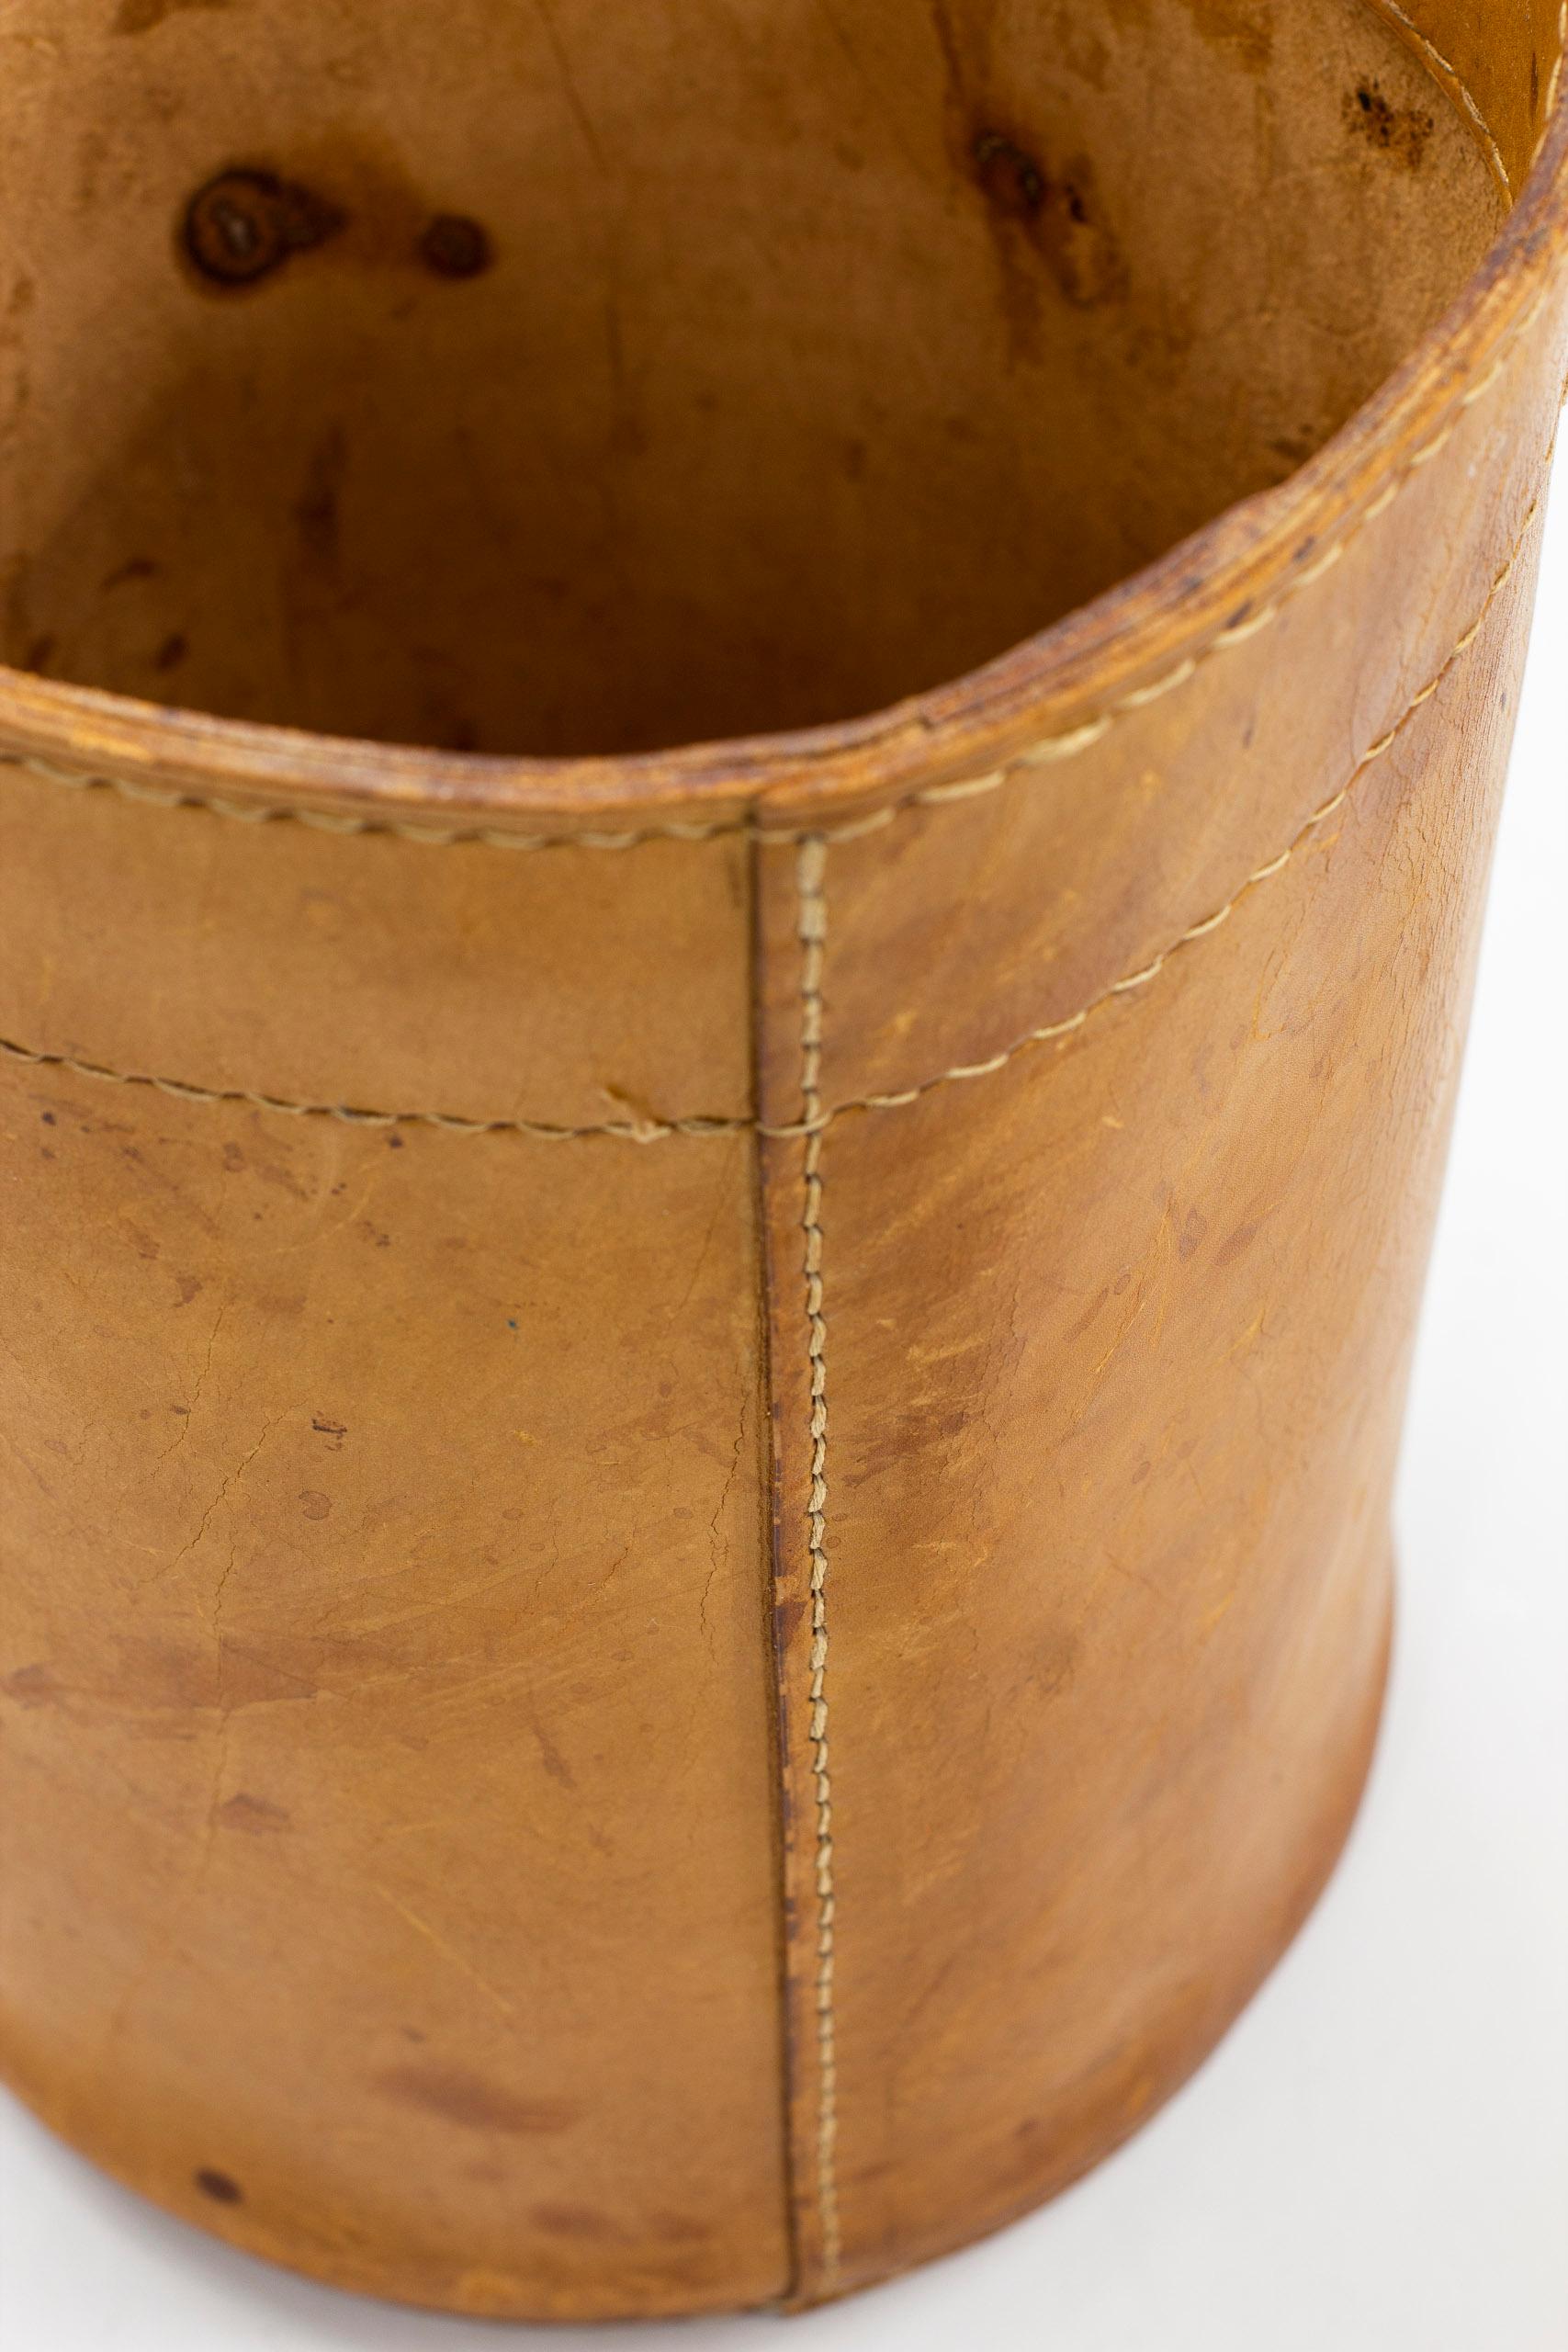 Waste paper basket made by Torben Ørskov & Co. Produced in Denmark during the 1960s. Hand made and sewn from saddle leather with beautiful patina. Good vintage condition with age related wear and patina.

Dimensions: Ø. 24 H. 35 cm.

